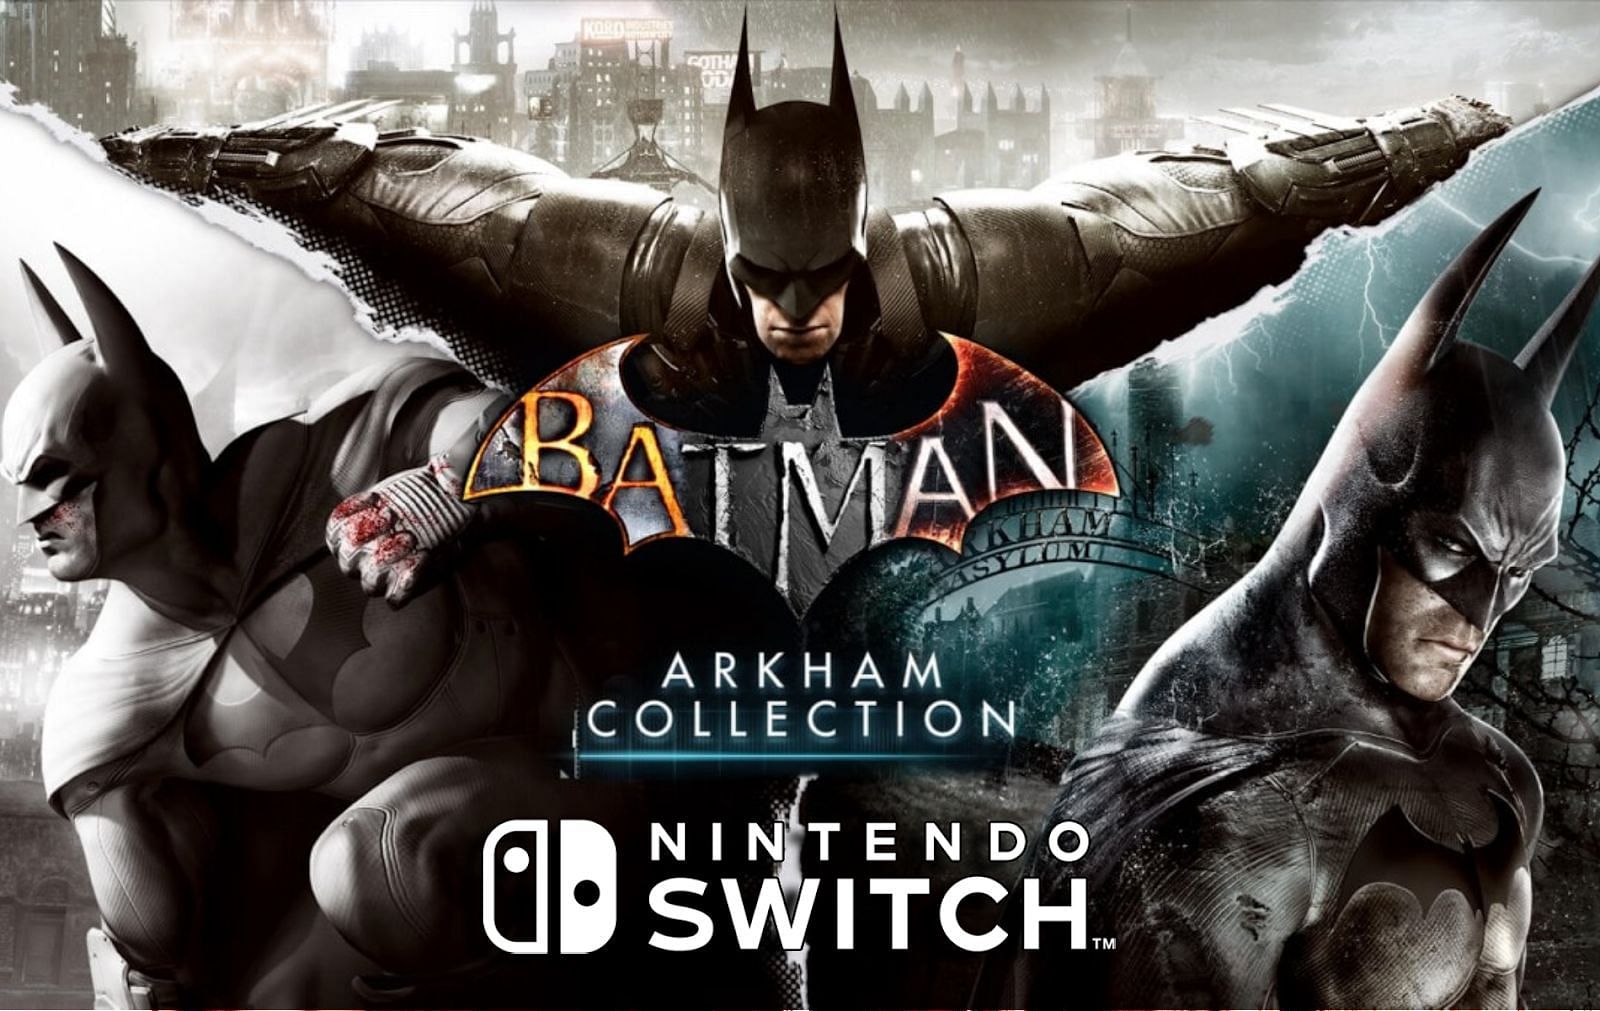 Batman Arkham Series is coming to Nintendo Switch (Image by WB Games)